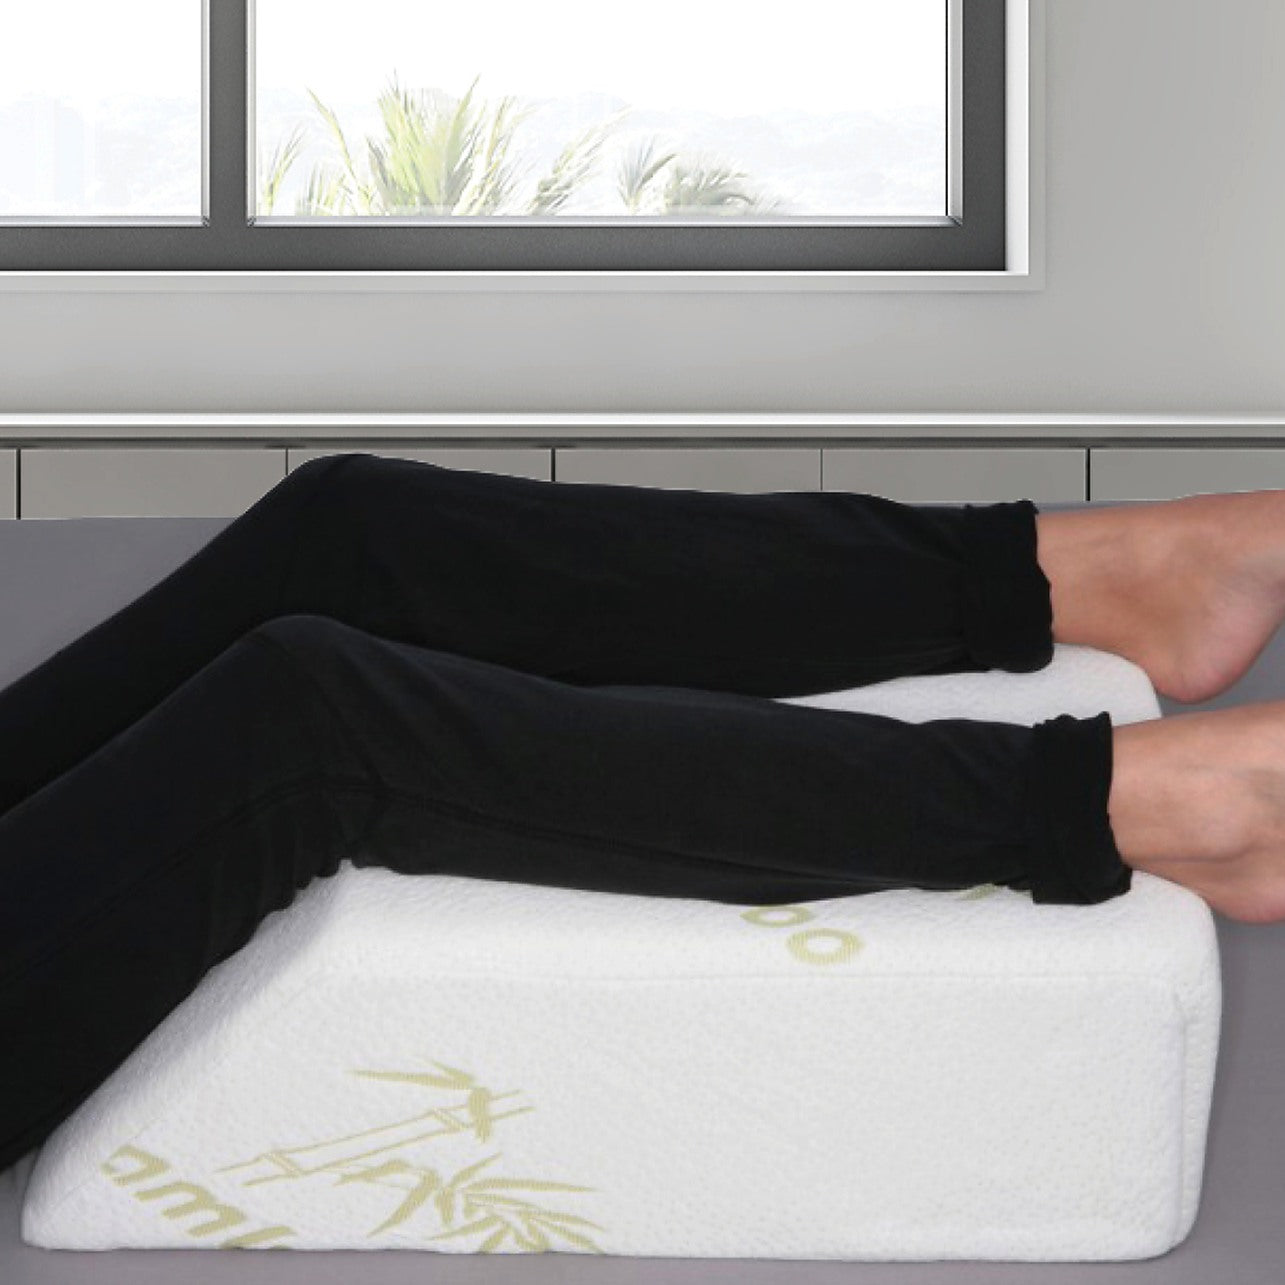 Leg Elevation Pillow with Memory Foam & Cooling Gel - Wedge Pillow for